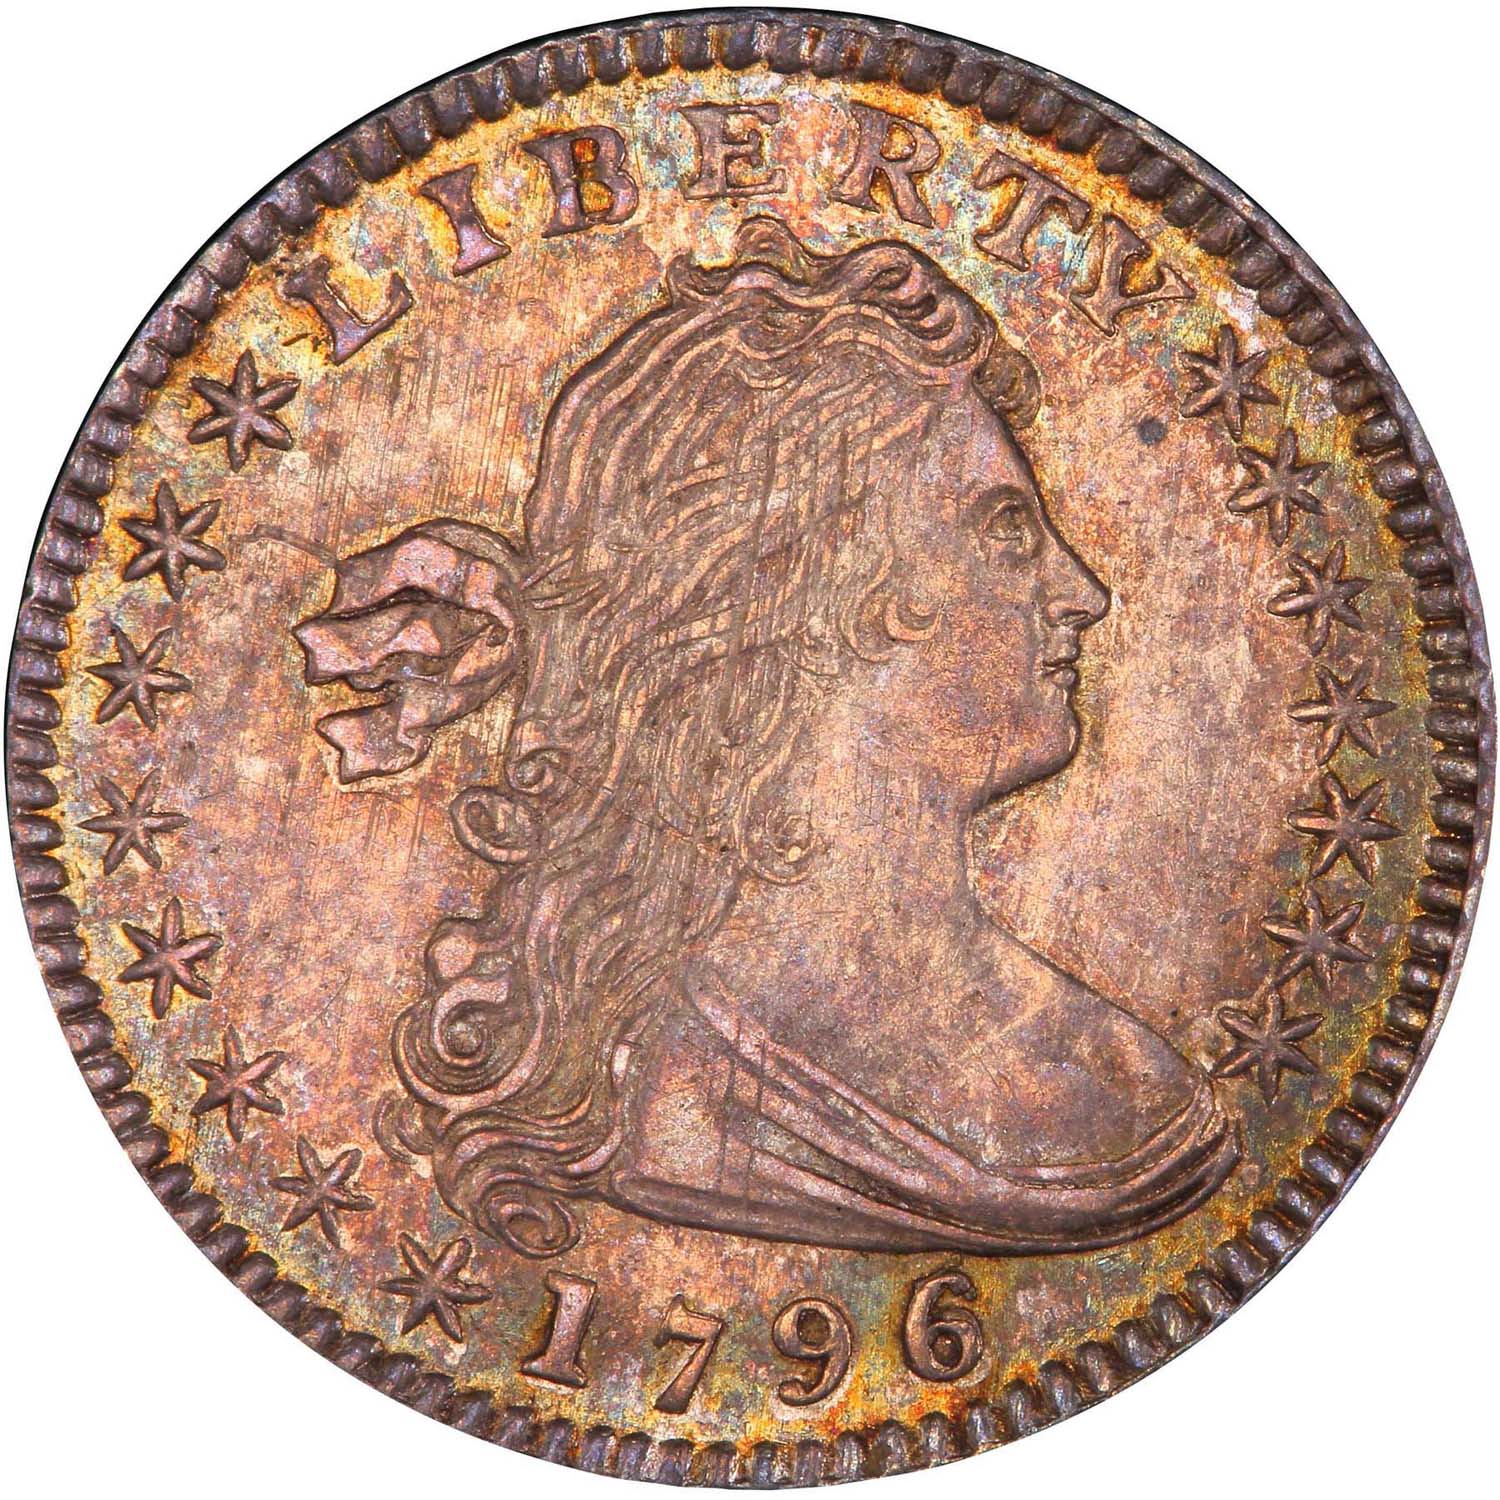 H10C 1796/5 PCGS MS64+ CAC, provenance from the Eliasberg collection, $92,000. Legend-Morphy image.